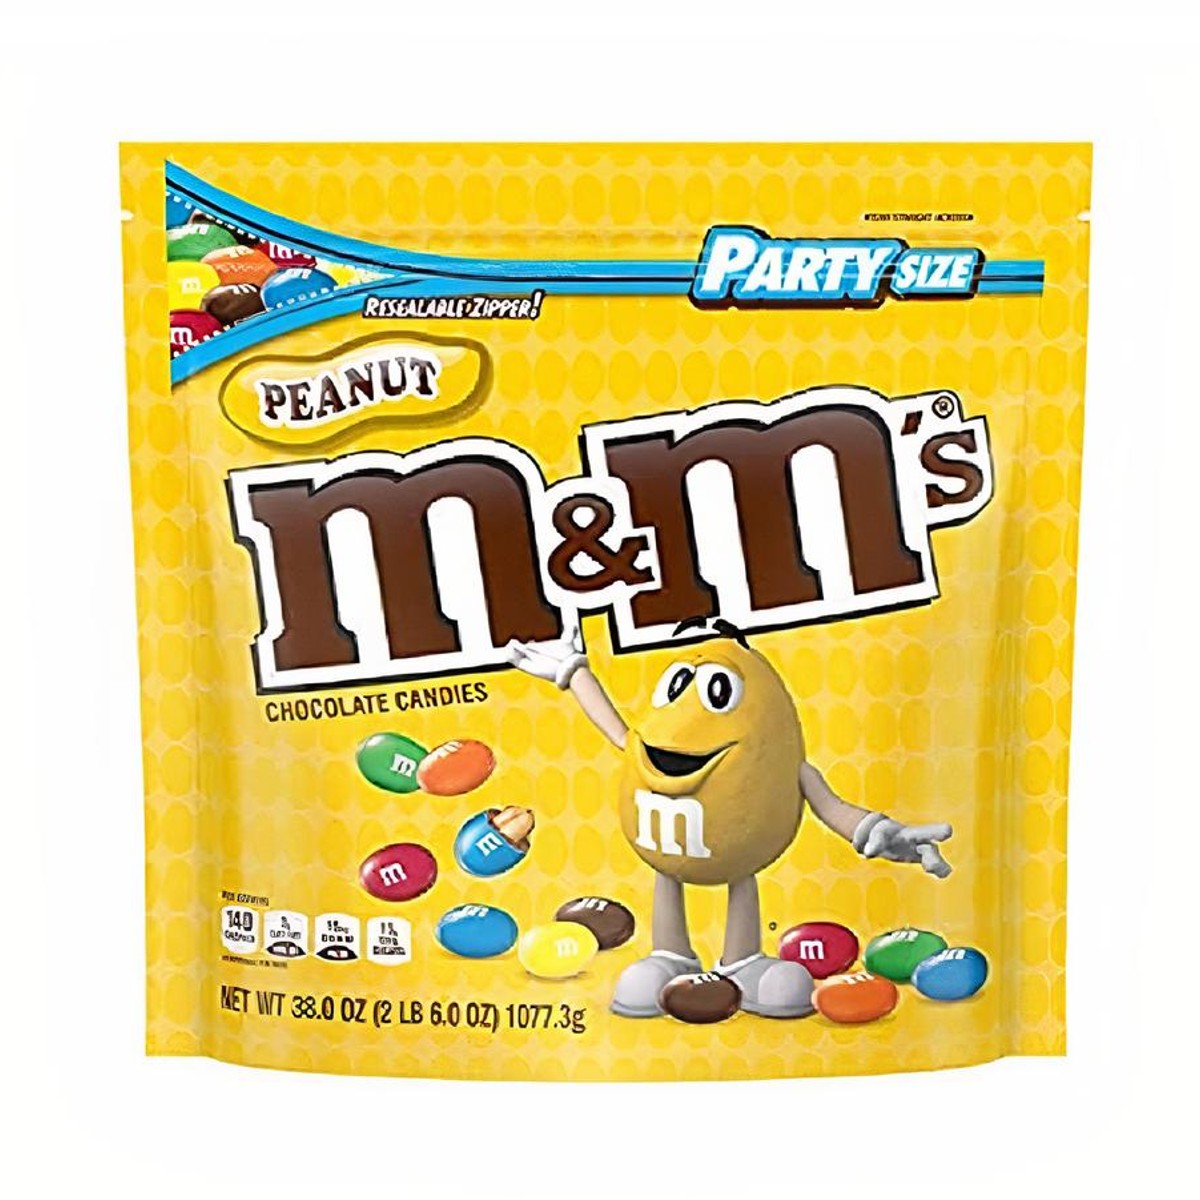 Buy M&m's Halloween Milk Chocolate Party Share Bag 11 Pieces 140g